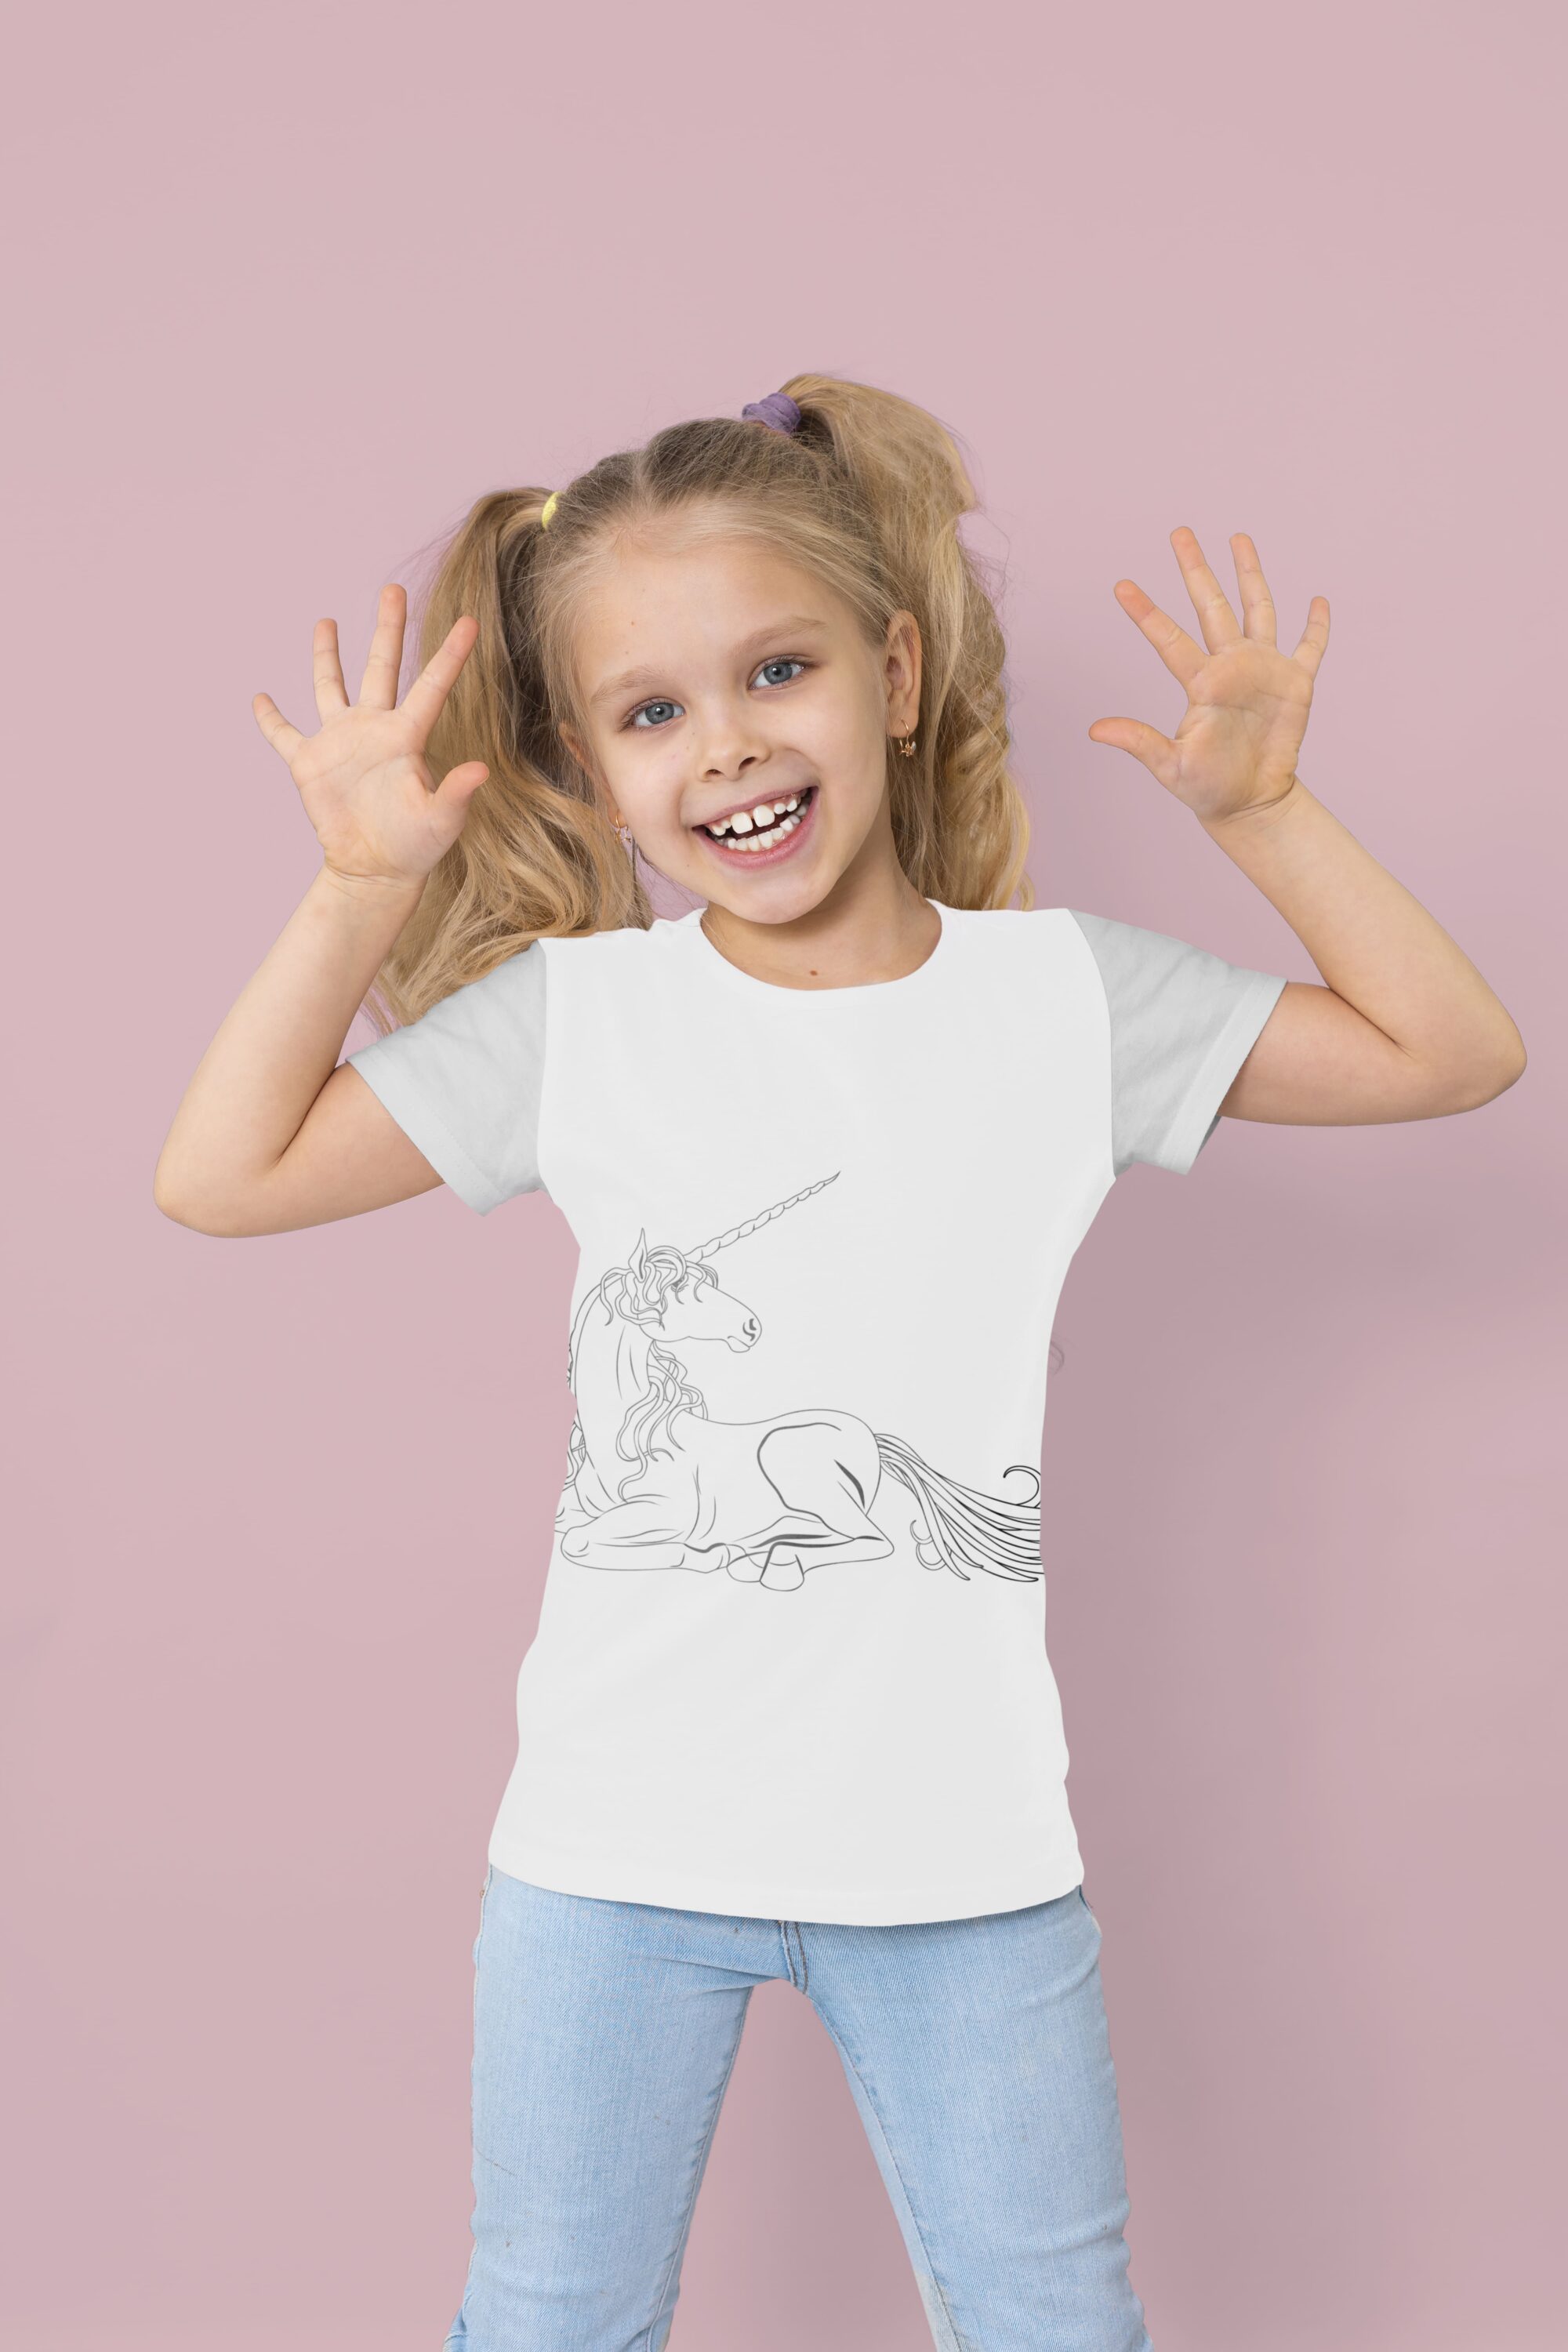 White t-shirt with gray sleeves and a gray lying unicorn, on a girl on a pink background.